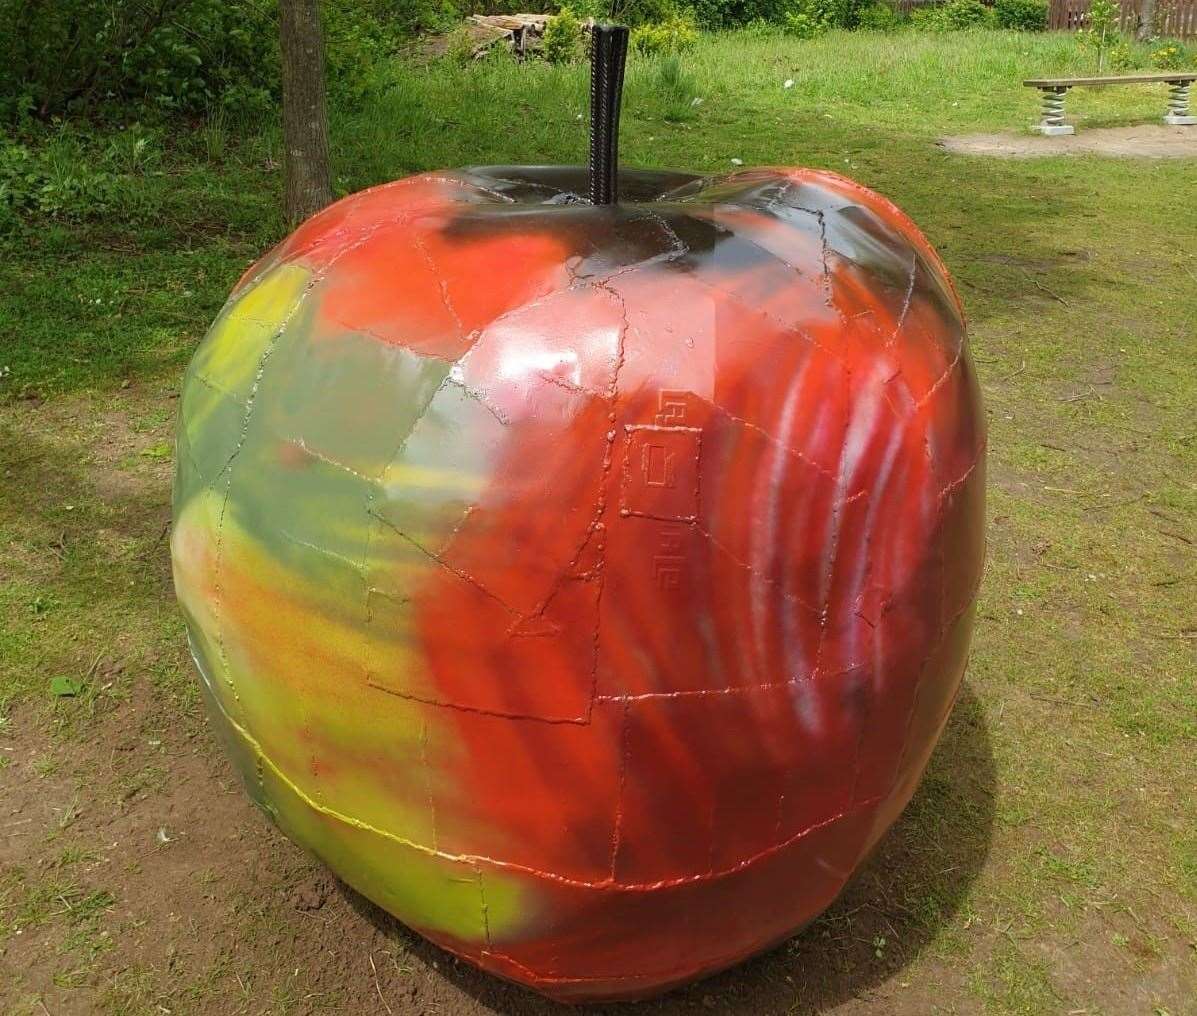 The Hungry Caterpillar trail at Bluewater has a new art installation in the form of the apple from the story